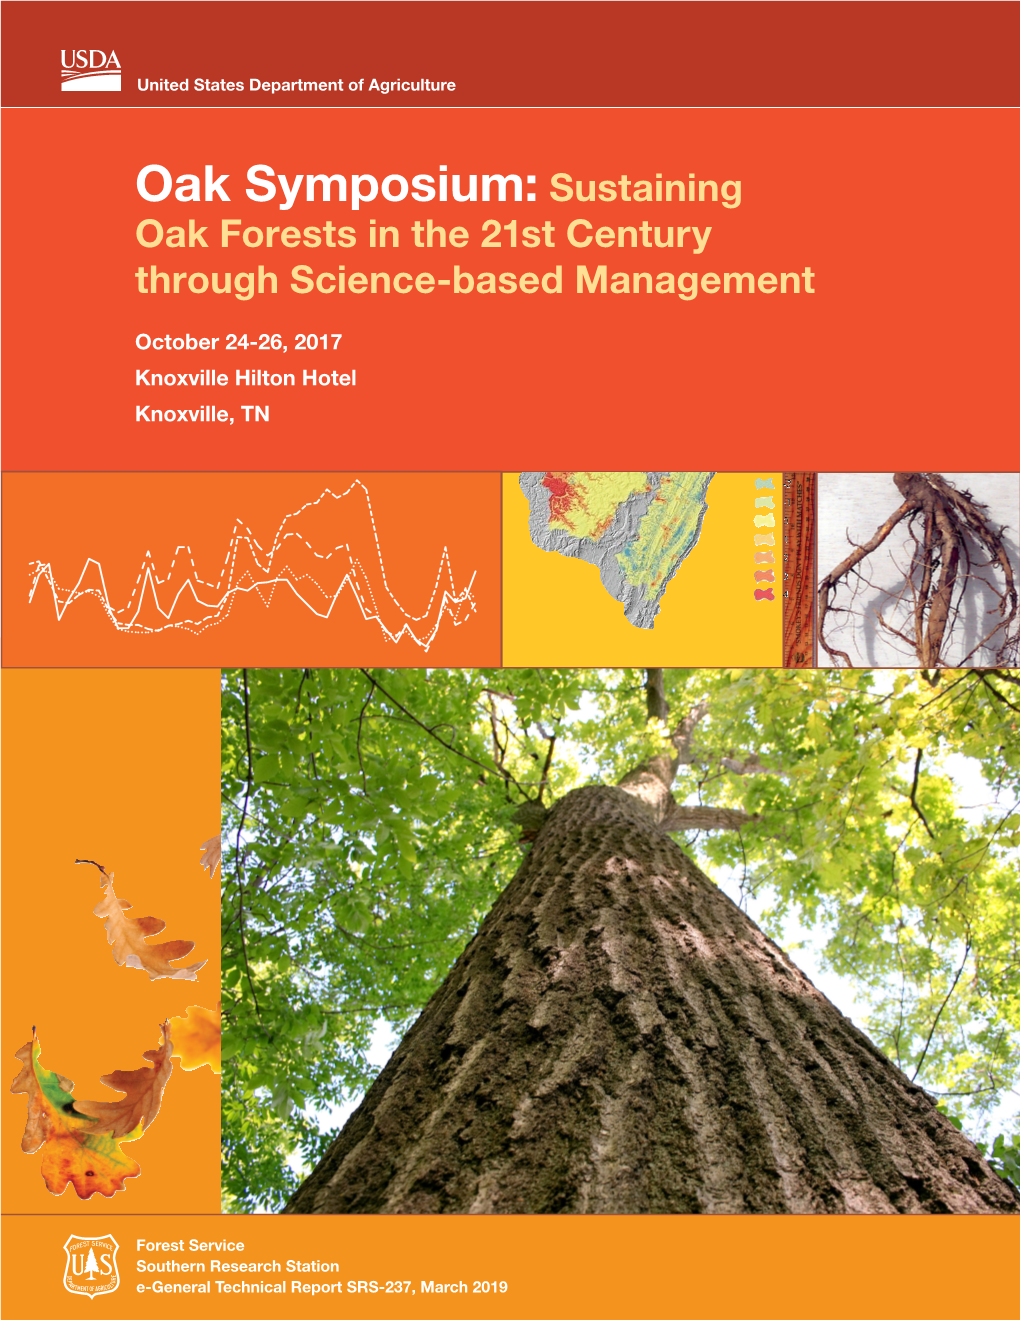 Oak Symposium: Sustaining Oak Forests in the 21St Century Through Science-Based Management